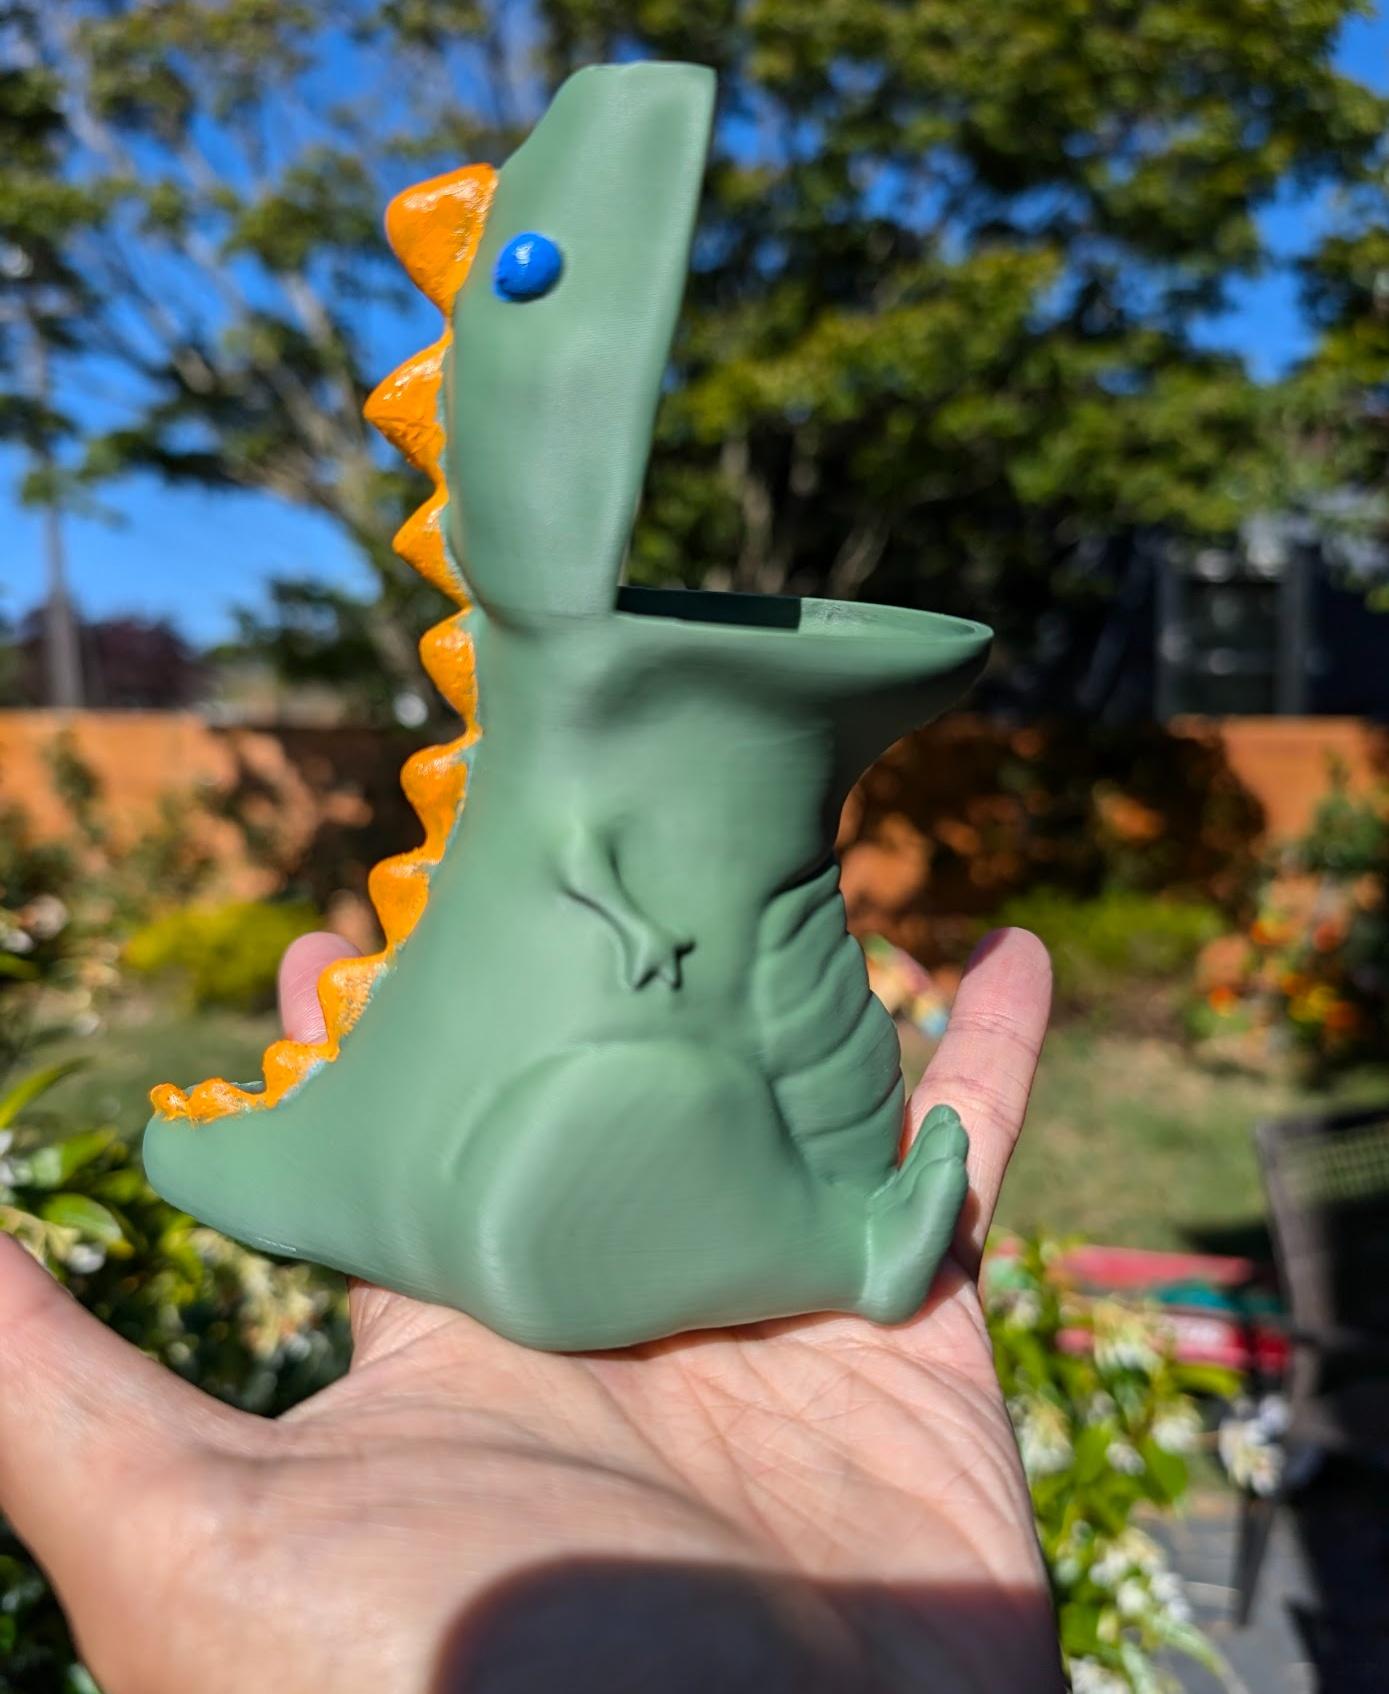 Chubby T-Rex Dinosaur Pencil Holder / Pot / Container - Last weekend was a family friend's birthday, so I made this whimsical pen holder! Great as a kid's birthday gift :) - 3d model